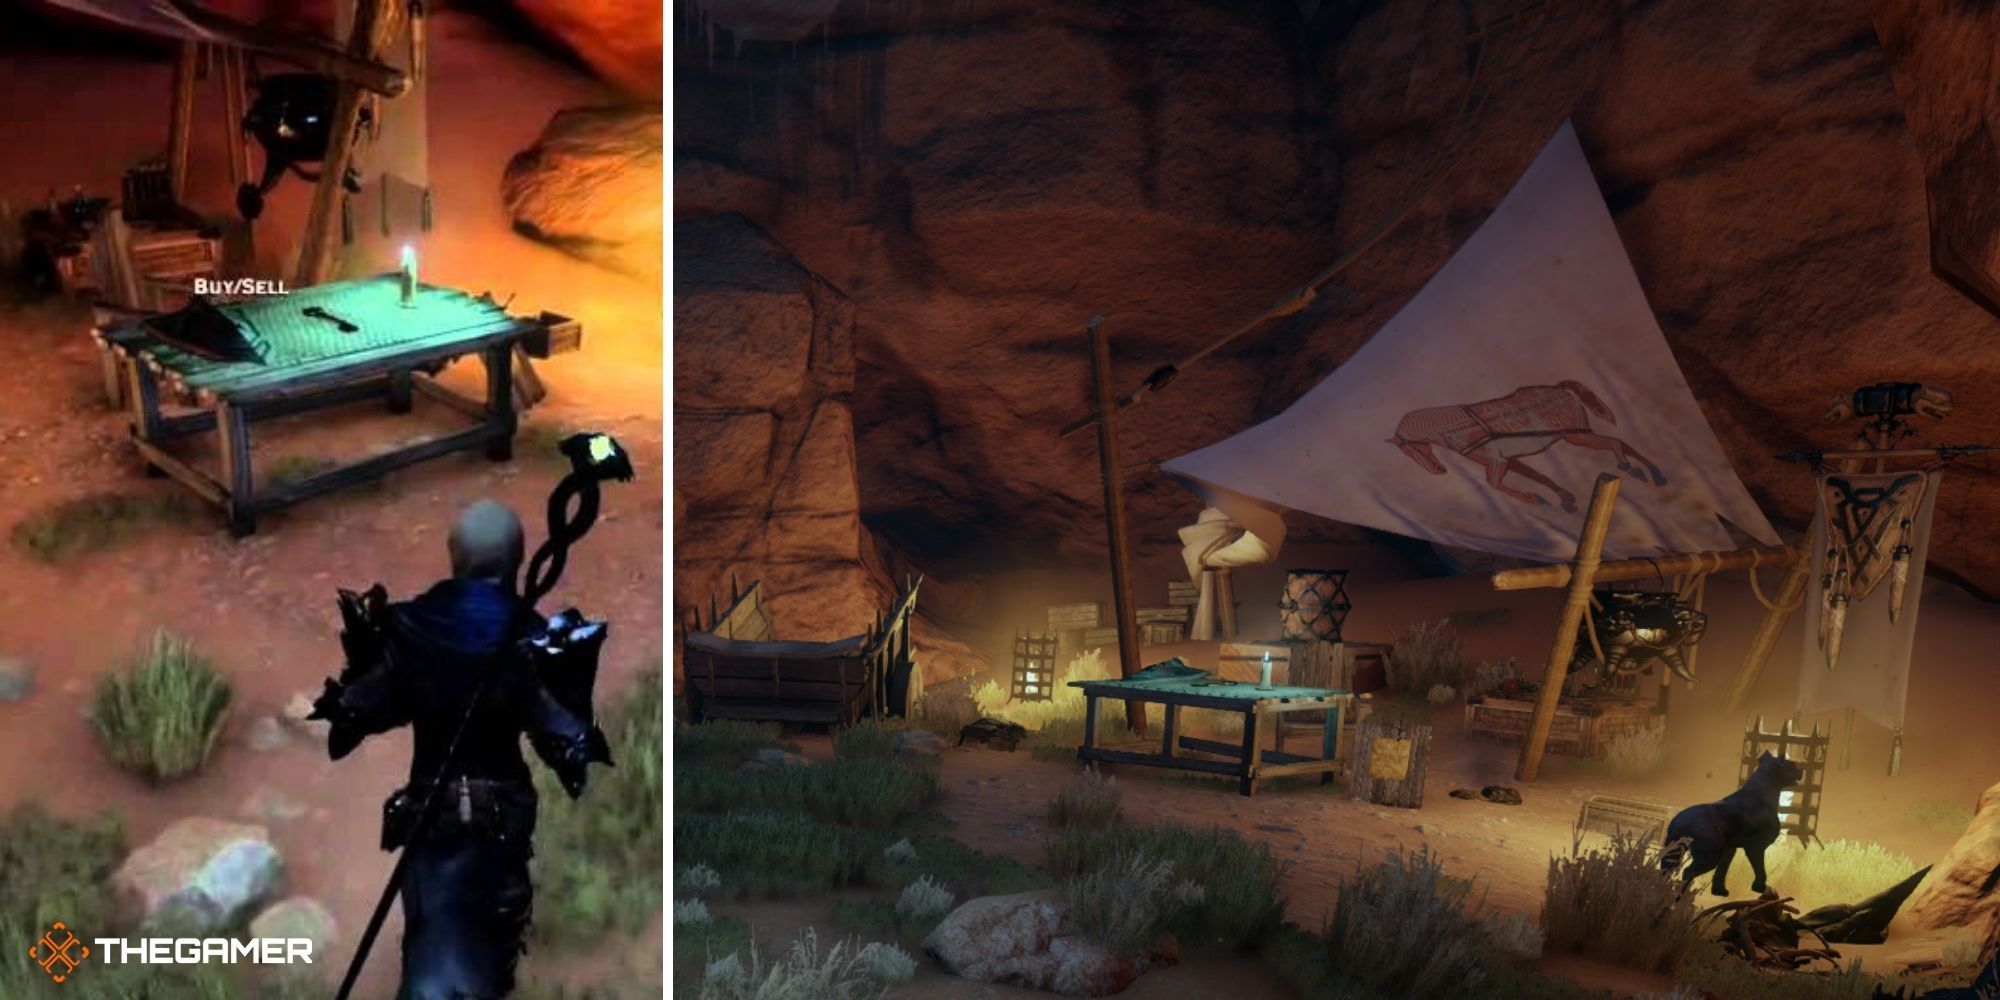 Dragon Age Inquistion Split Image - Merchant's Stall in the Hissing Wastes